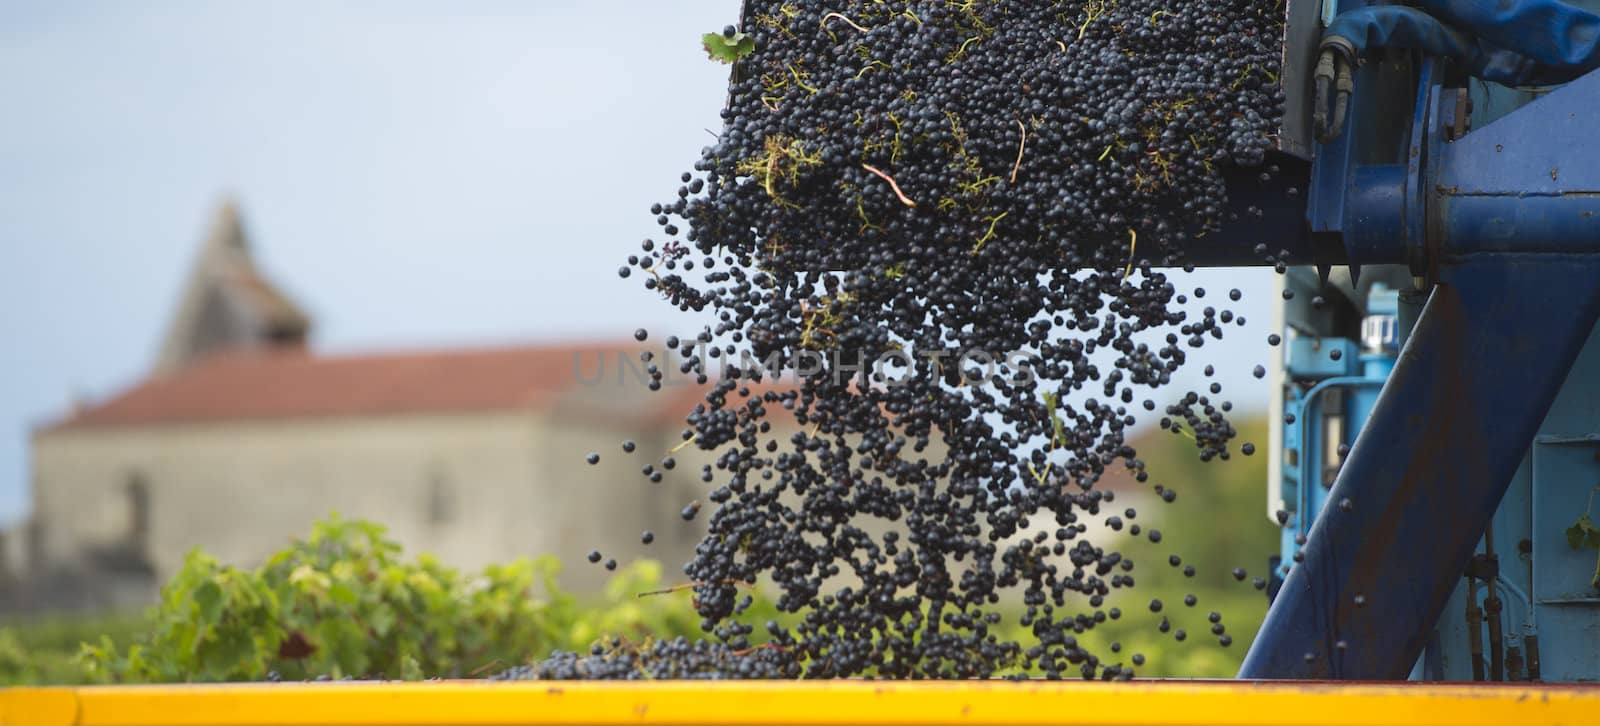 Mechanical harvesting of grapes in the vineyard